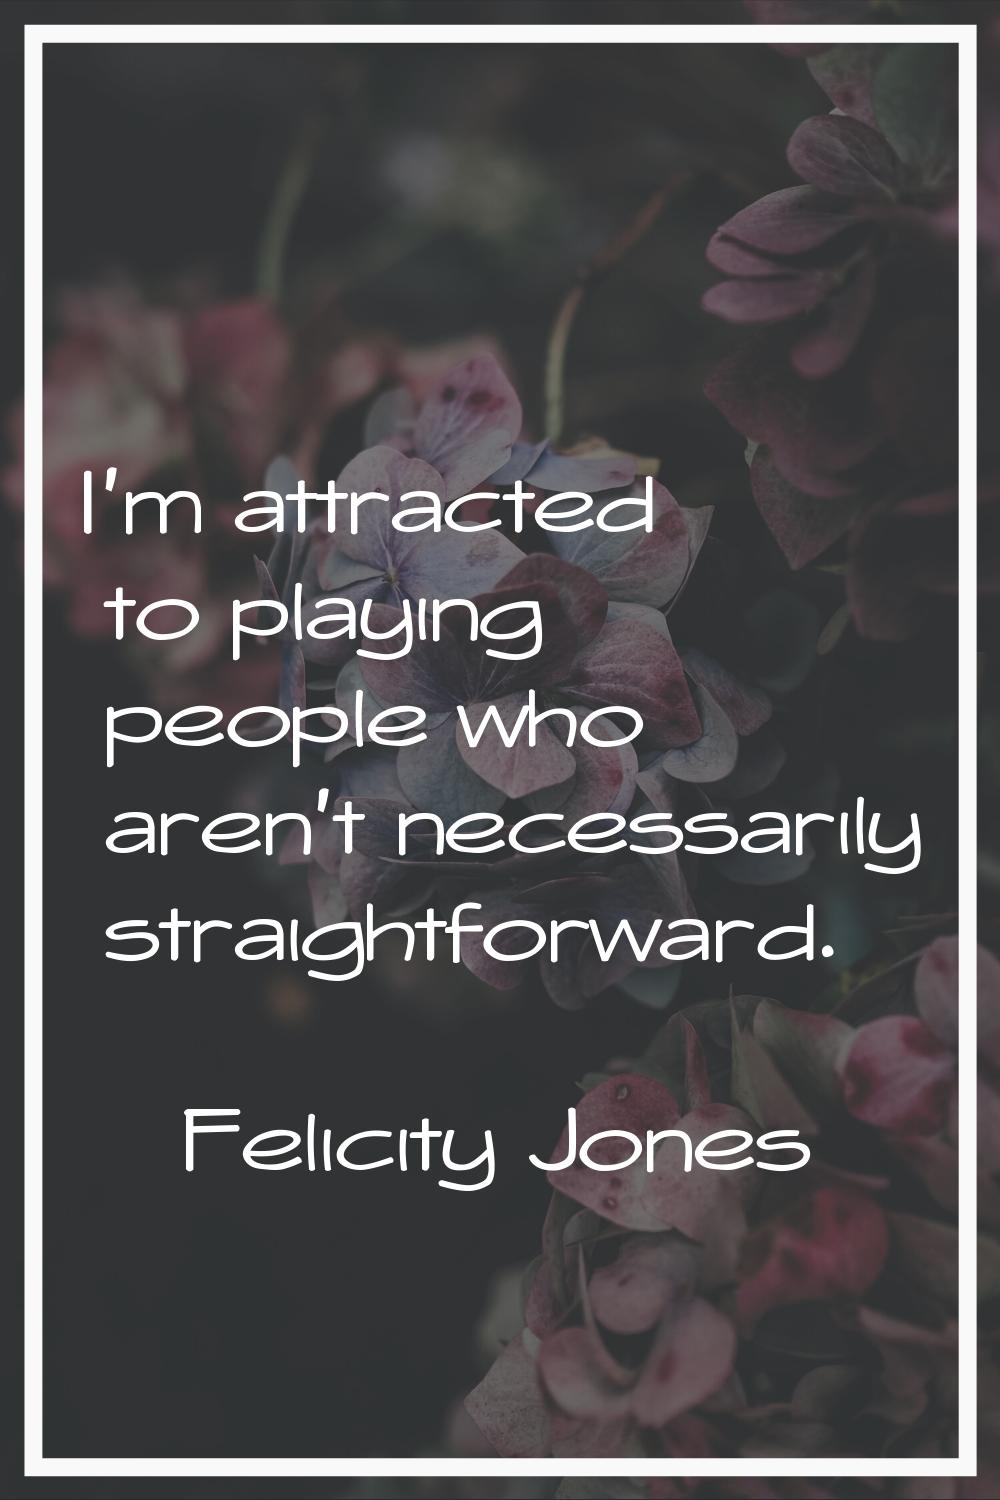 I'm attracted to playing people who aren't necessarily straightforward.